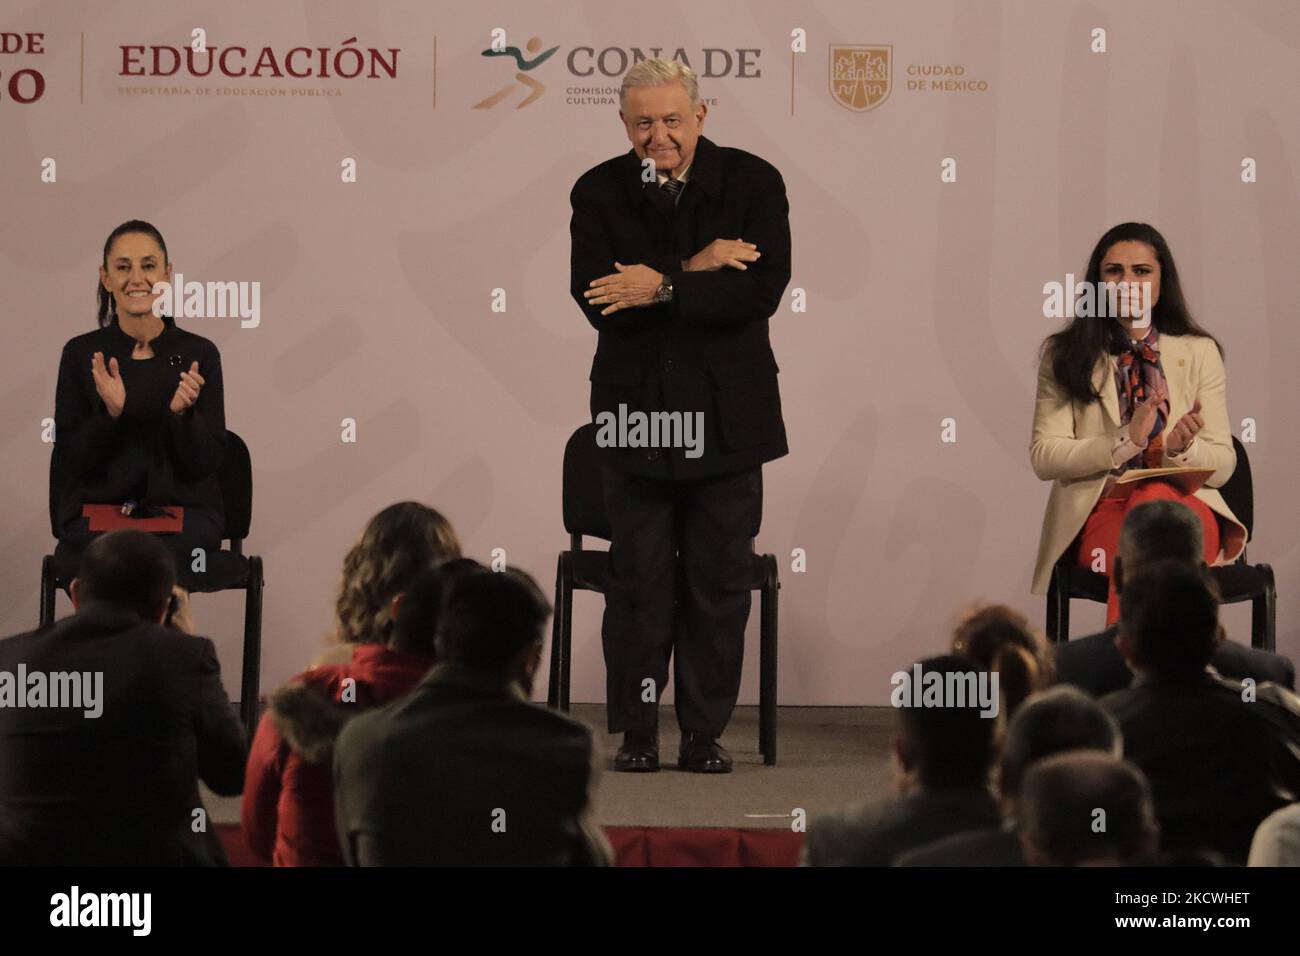 At the centre, Andrés Manuel López Obrador, President of Mexico, during the ceremony to present the 2021 National Sports Award to the athletes who were selected for the award. The high-performance athletes who were recognised with the National Sports Award 2021 are: -Aremi Fuentes Zavala, weightlifting (bronze medal at the Tokyo Olympics). -Julio César Urías Acosta, baseball (Los Angeles Dodgers baseball player). -Mónica Olivia Rodríguez Saavedra, athletics. -Jannet Alegría Peña, Paralympic taekwondo. -José Manuel Zayas, weightlifting. -Mayte Ivonne Chávez García, professional football. -María Stock Photo